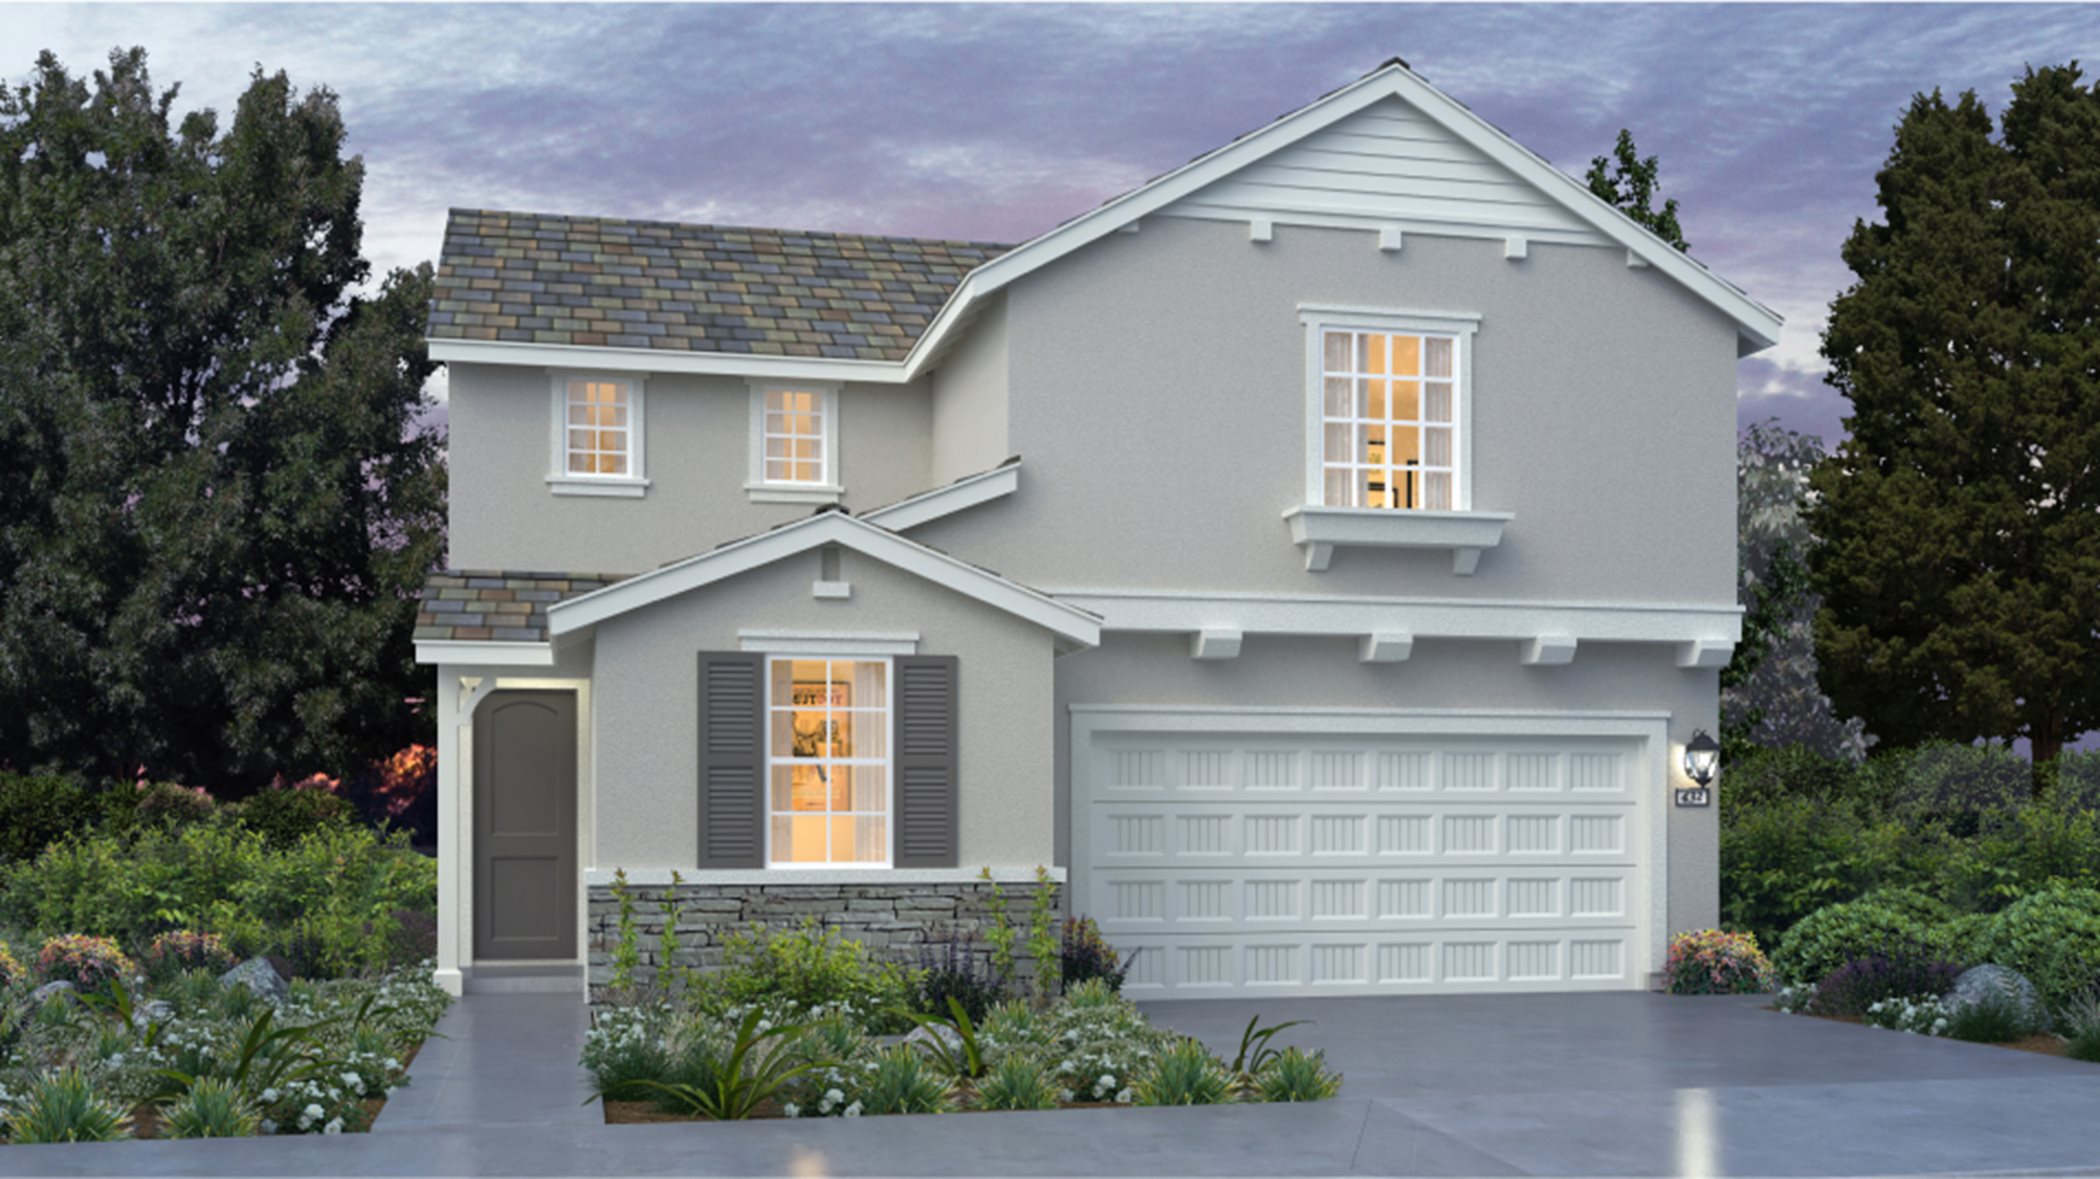 Stone accents, window shutters and a gable roof come together to provide serious curb appeal